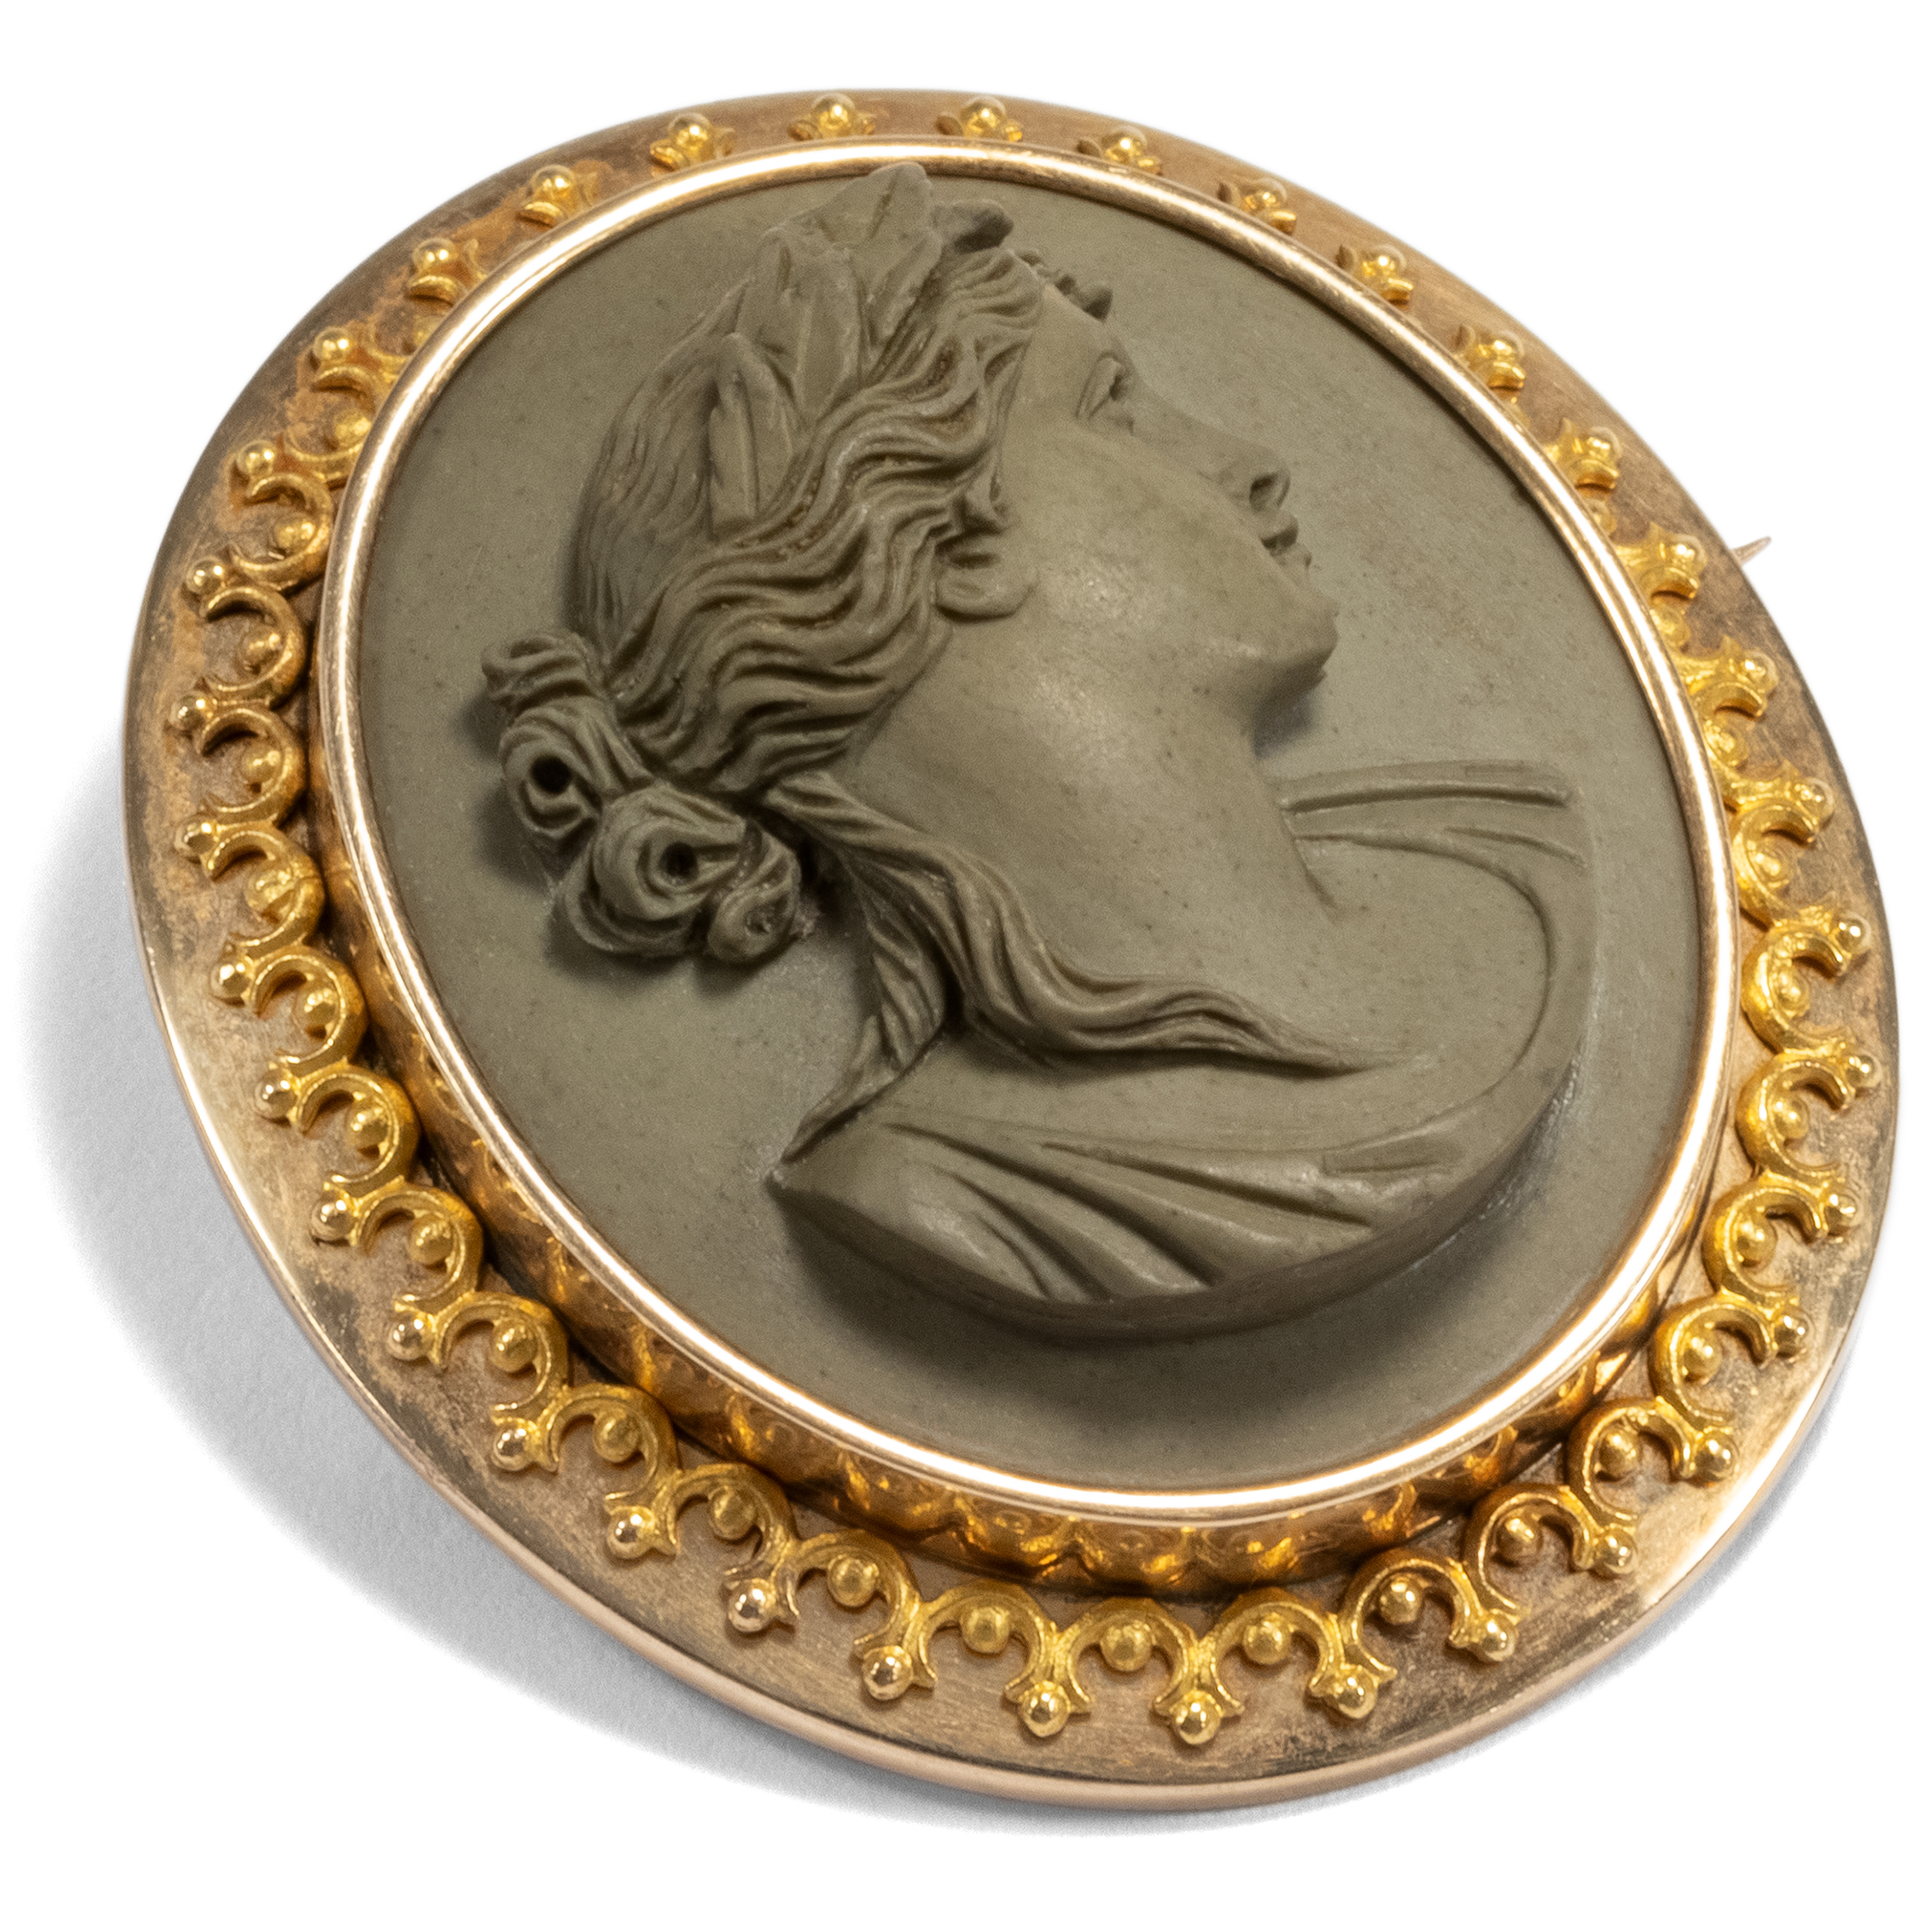 Antique Brooch With Cameo From "Vesuvius lava", Gold Setting, Naples Around 1870